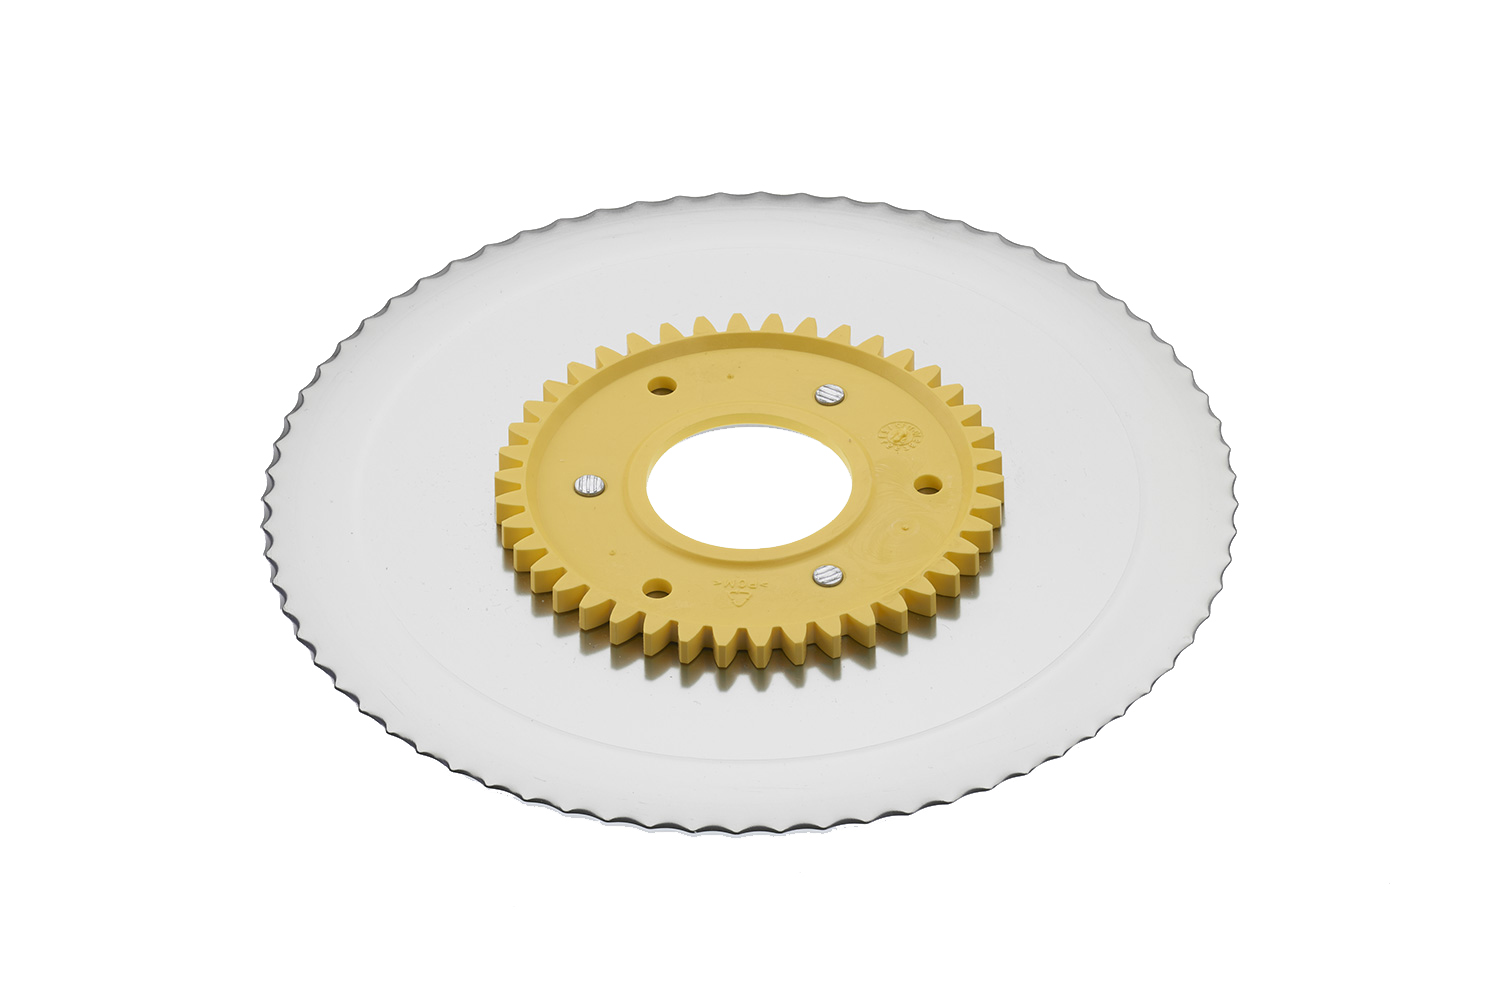 Serrated circular blade with electropolished surface and a yellow gear